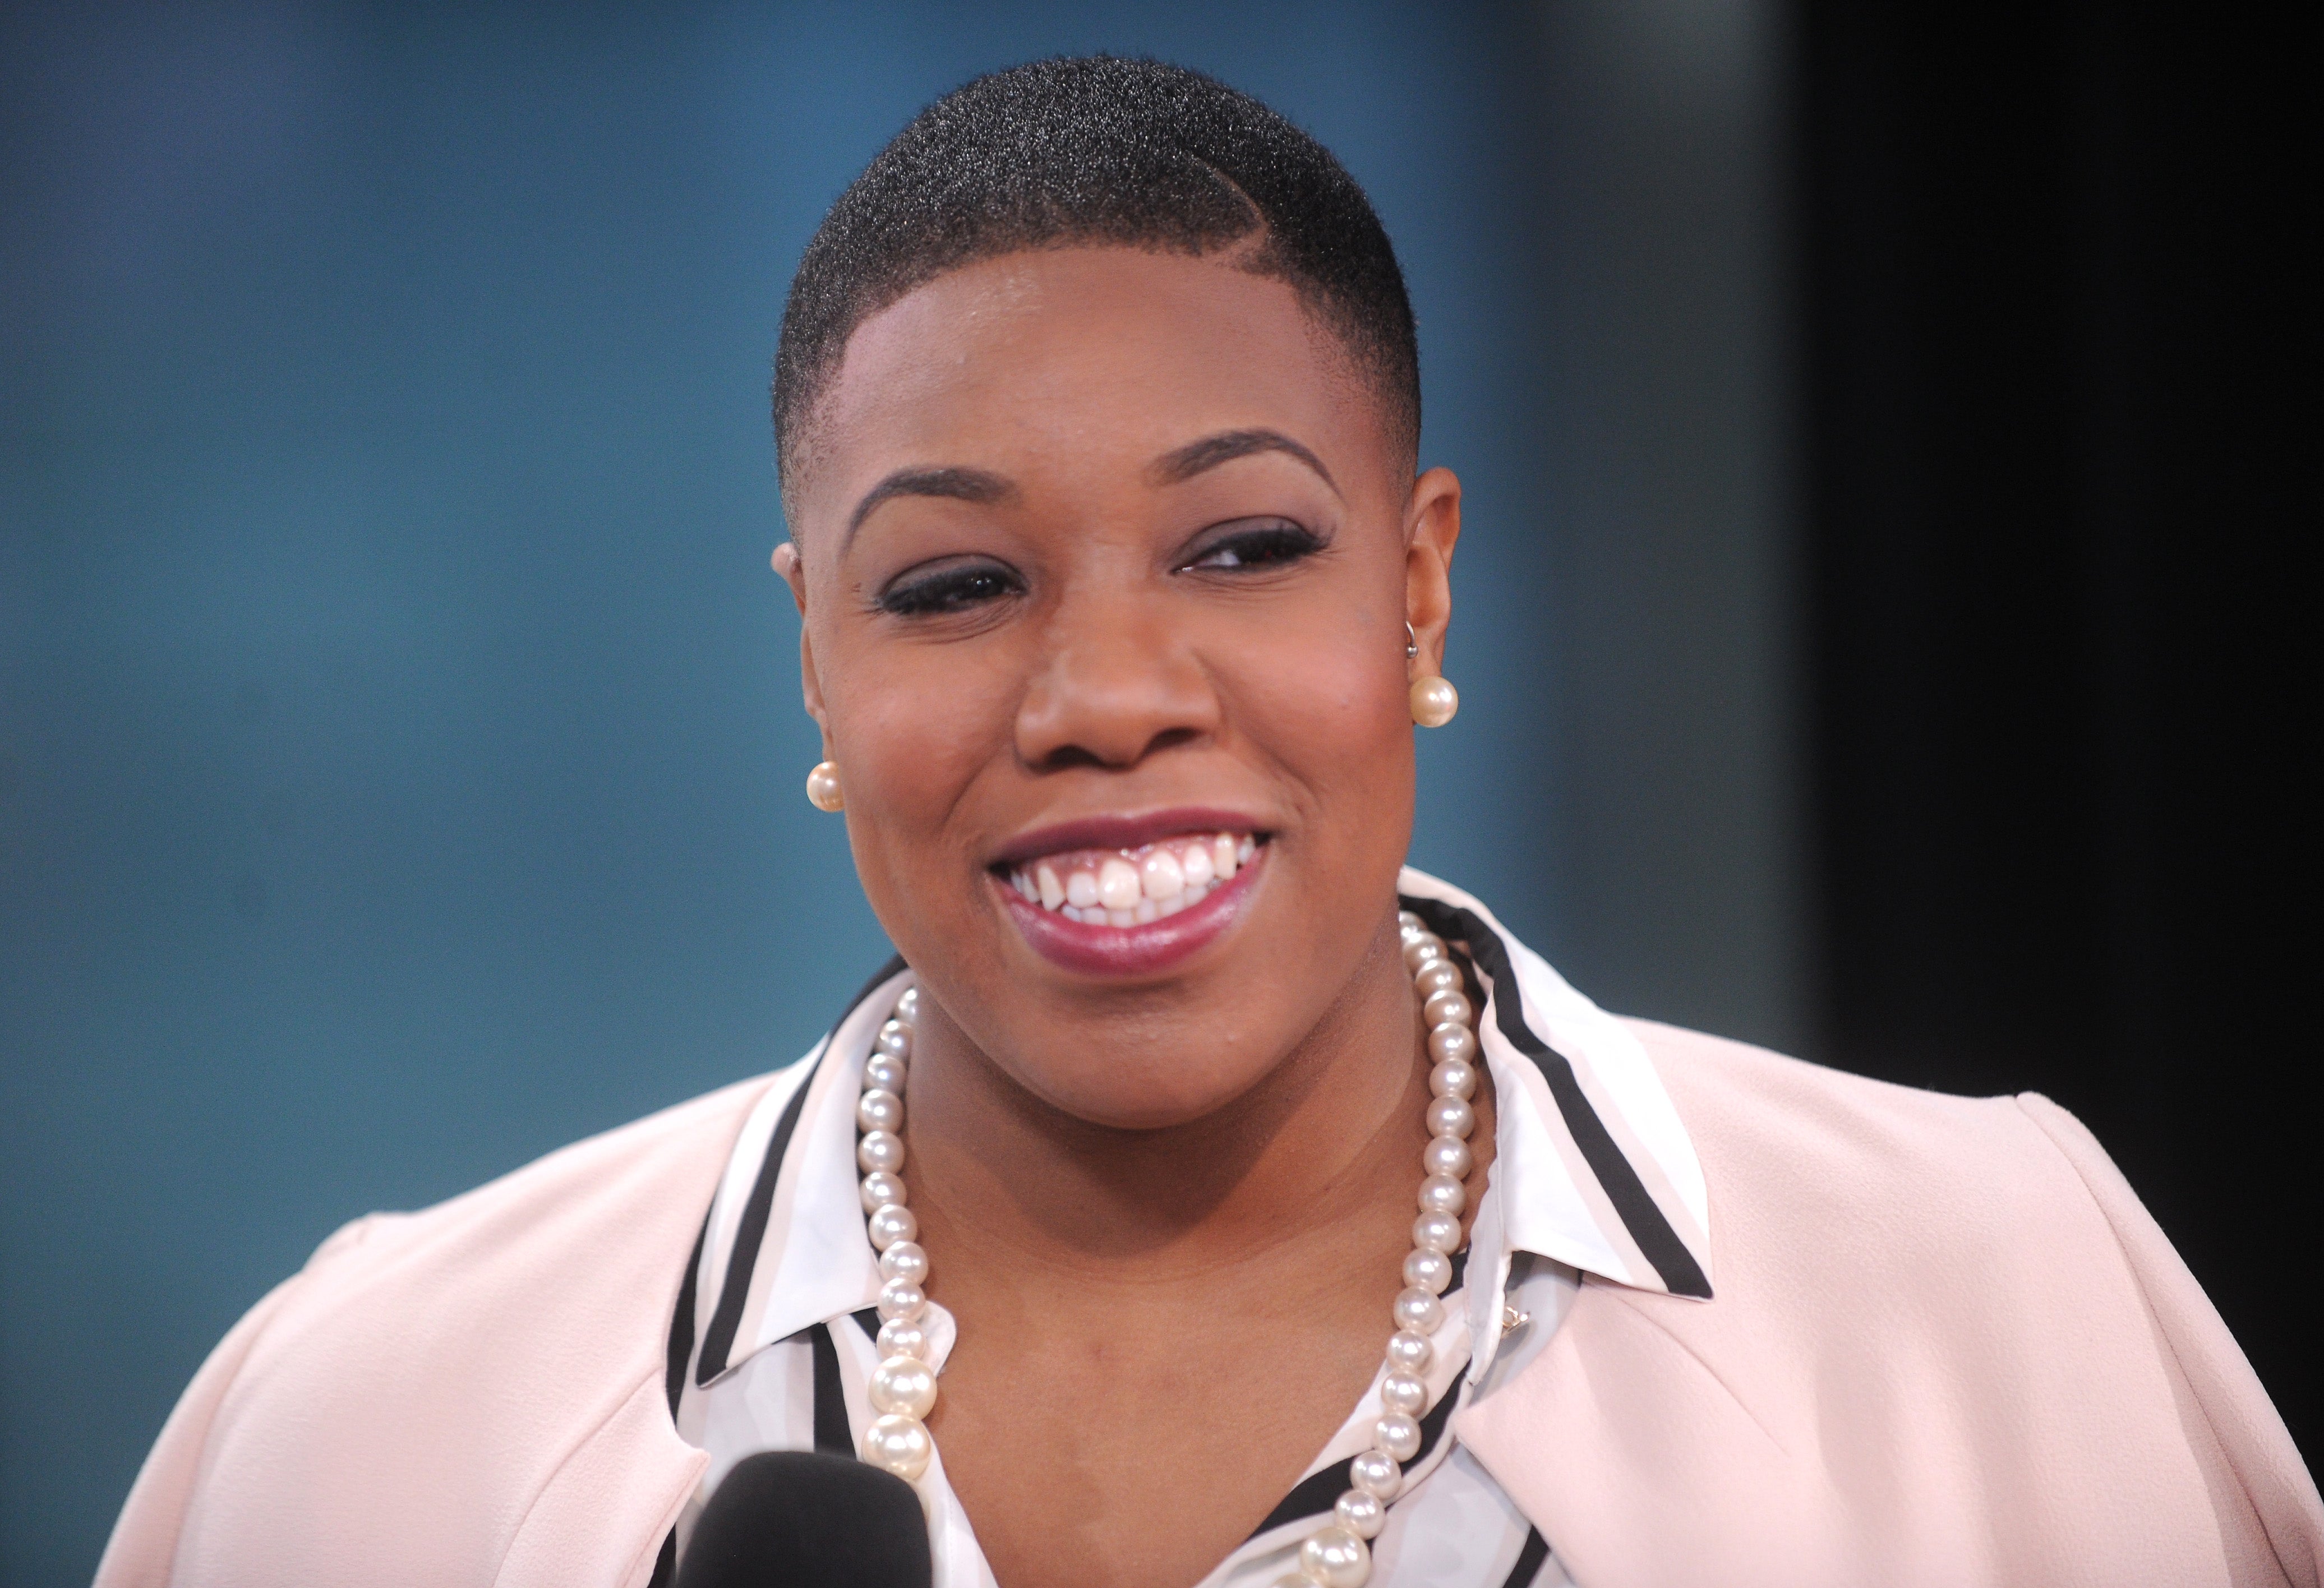 Symone Sanders On Women's Movements Of The Past: 'They Haven't Done Intersectionality Well'
